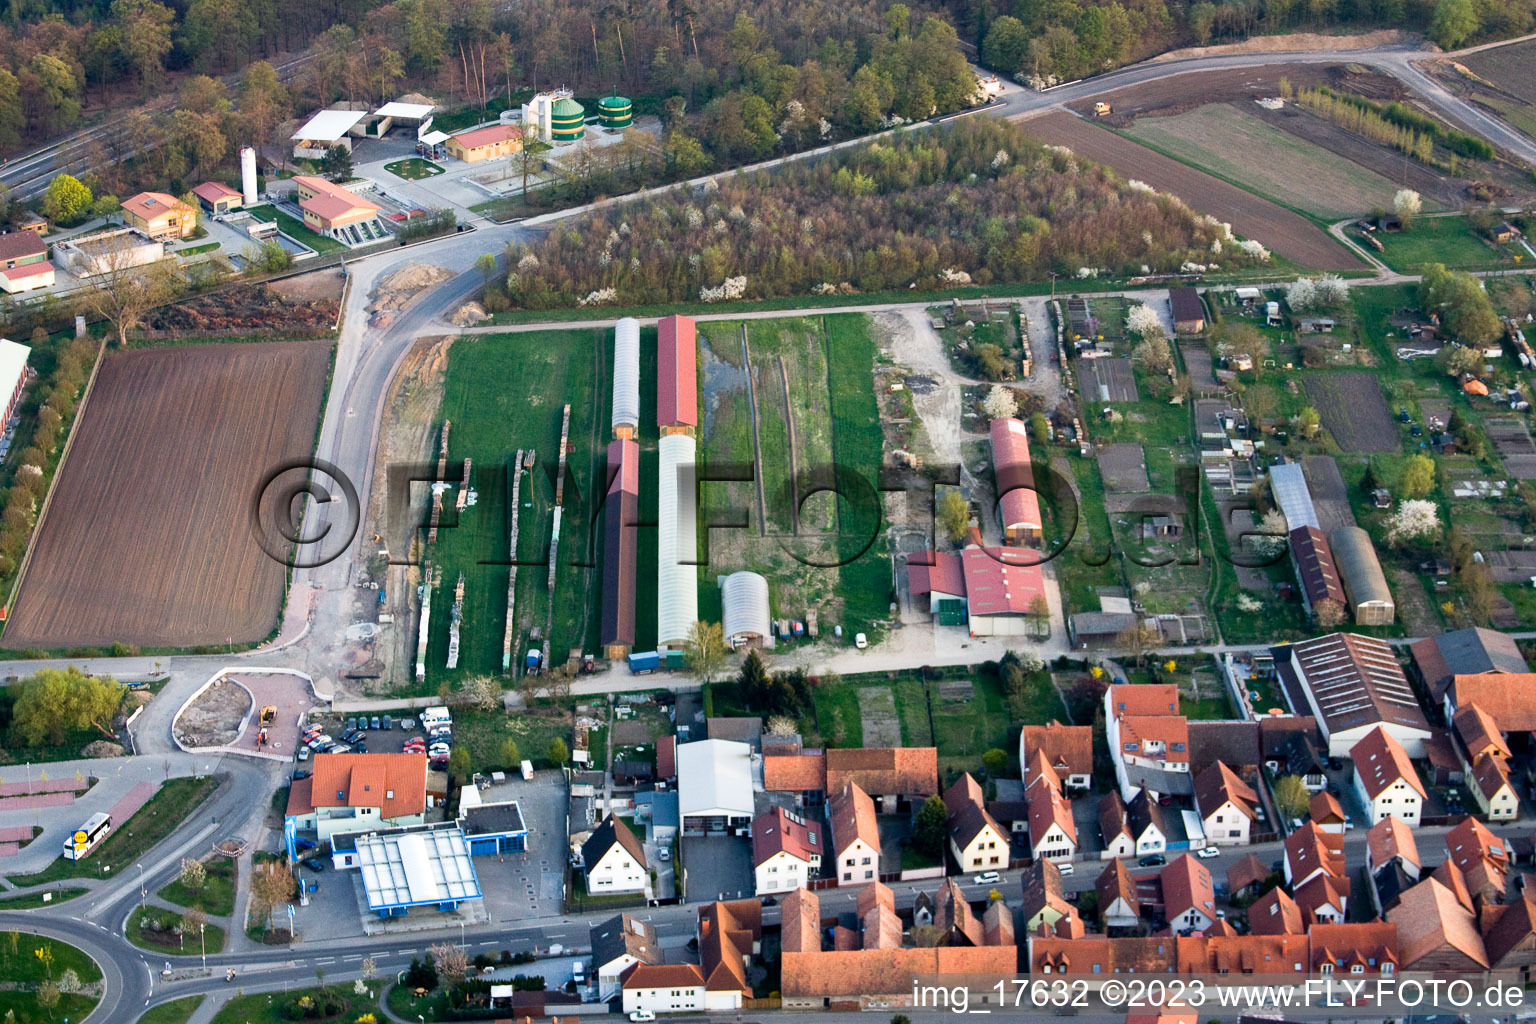 Aerial photograpy of Rheinstr in Kandel in the state Rhineland-Palatinate, Germany